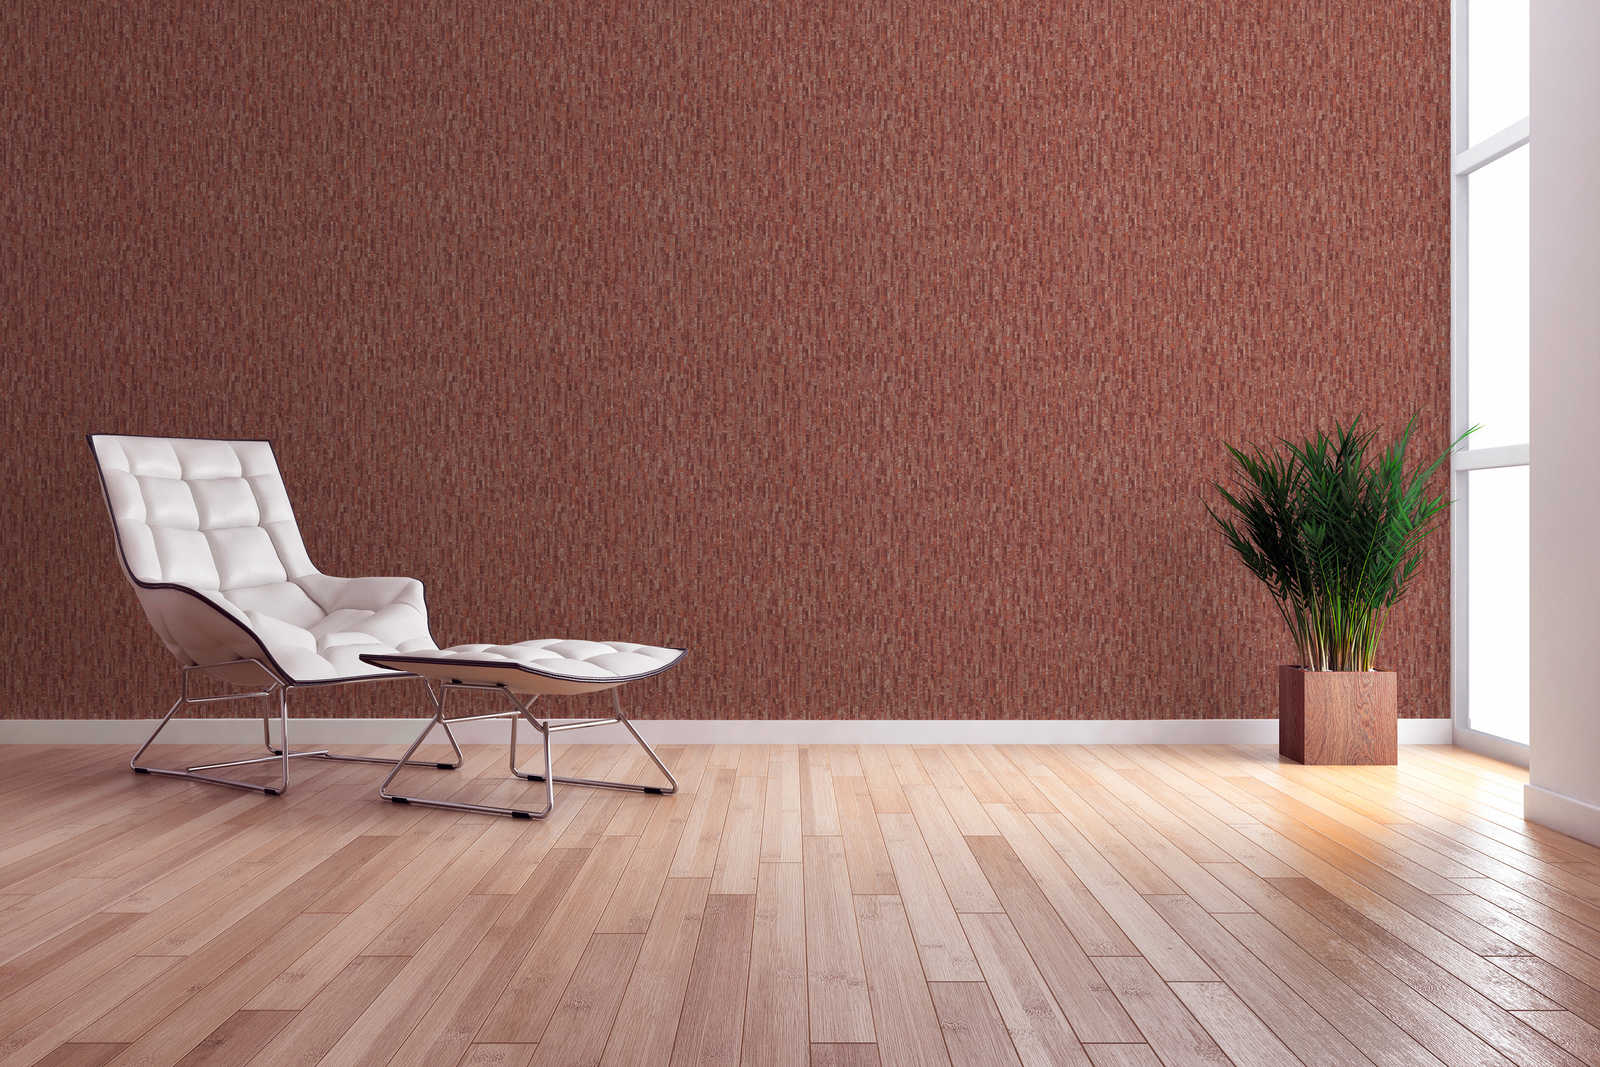             Rust-coloured wallpaper with natural textured pattern - red
        